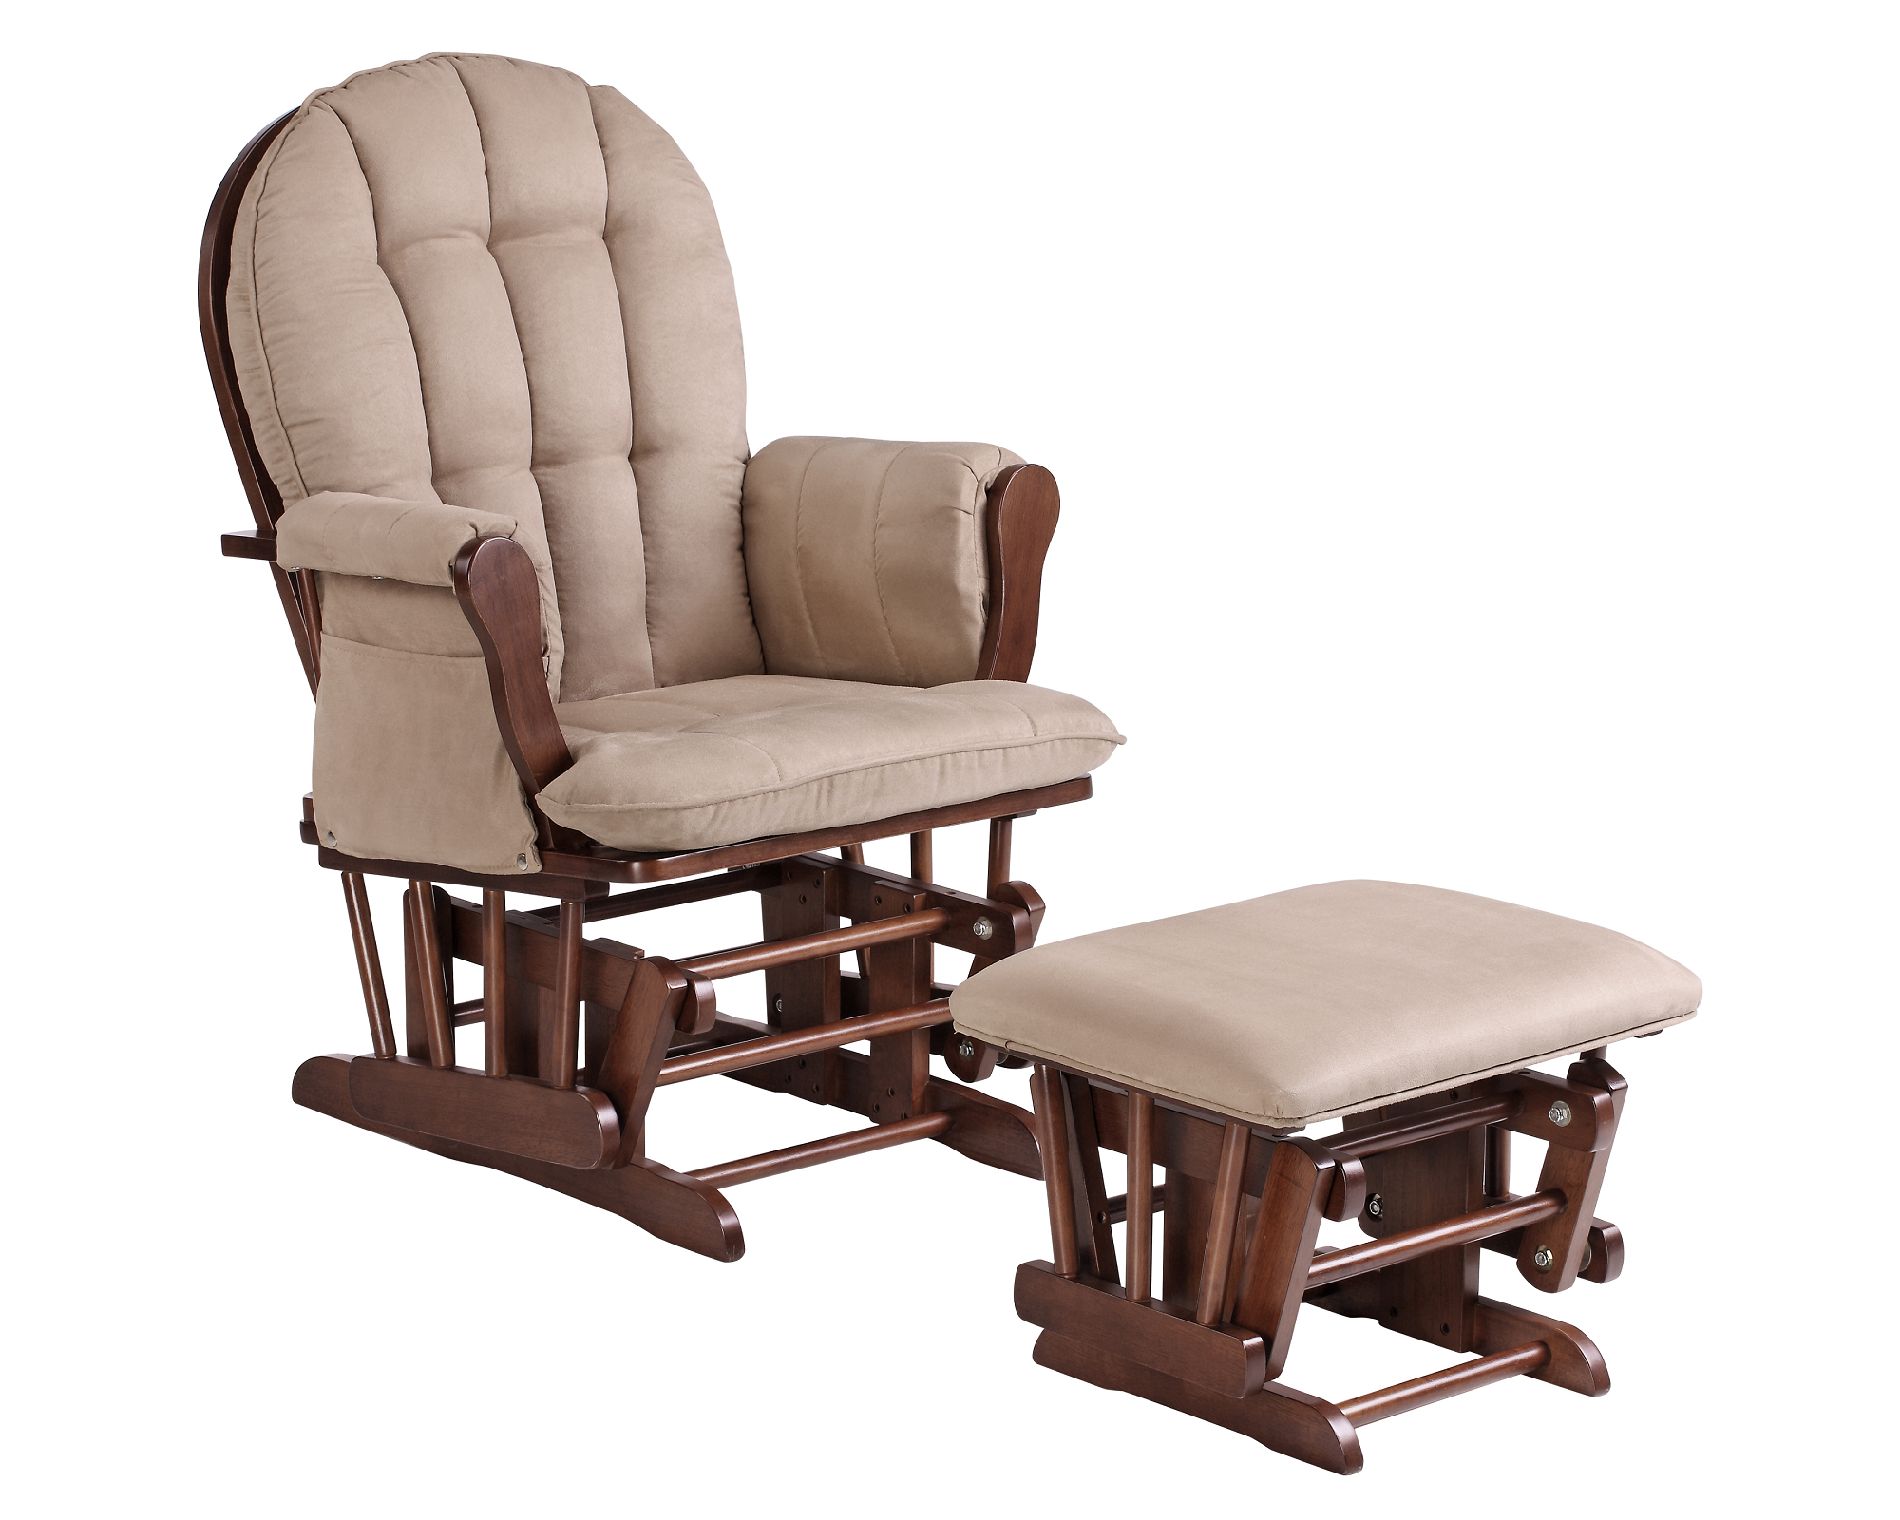 Glider Rocker Rocker and Ottoman: Comfort and Style from Sears BGSMLXY